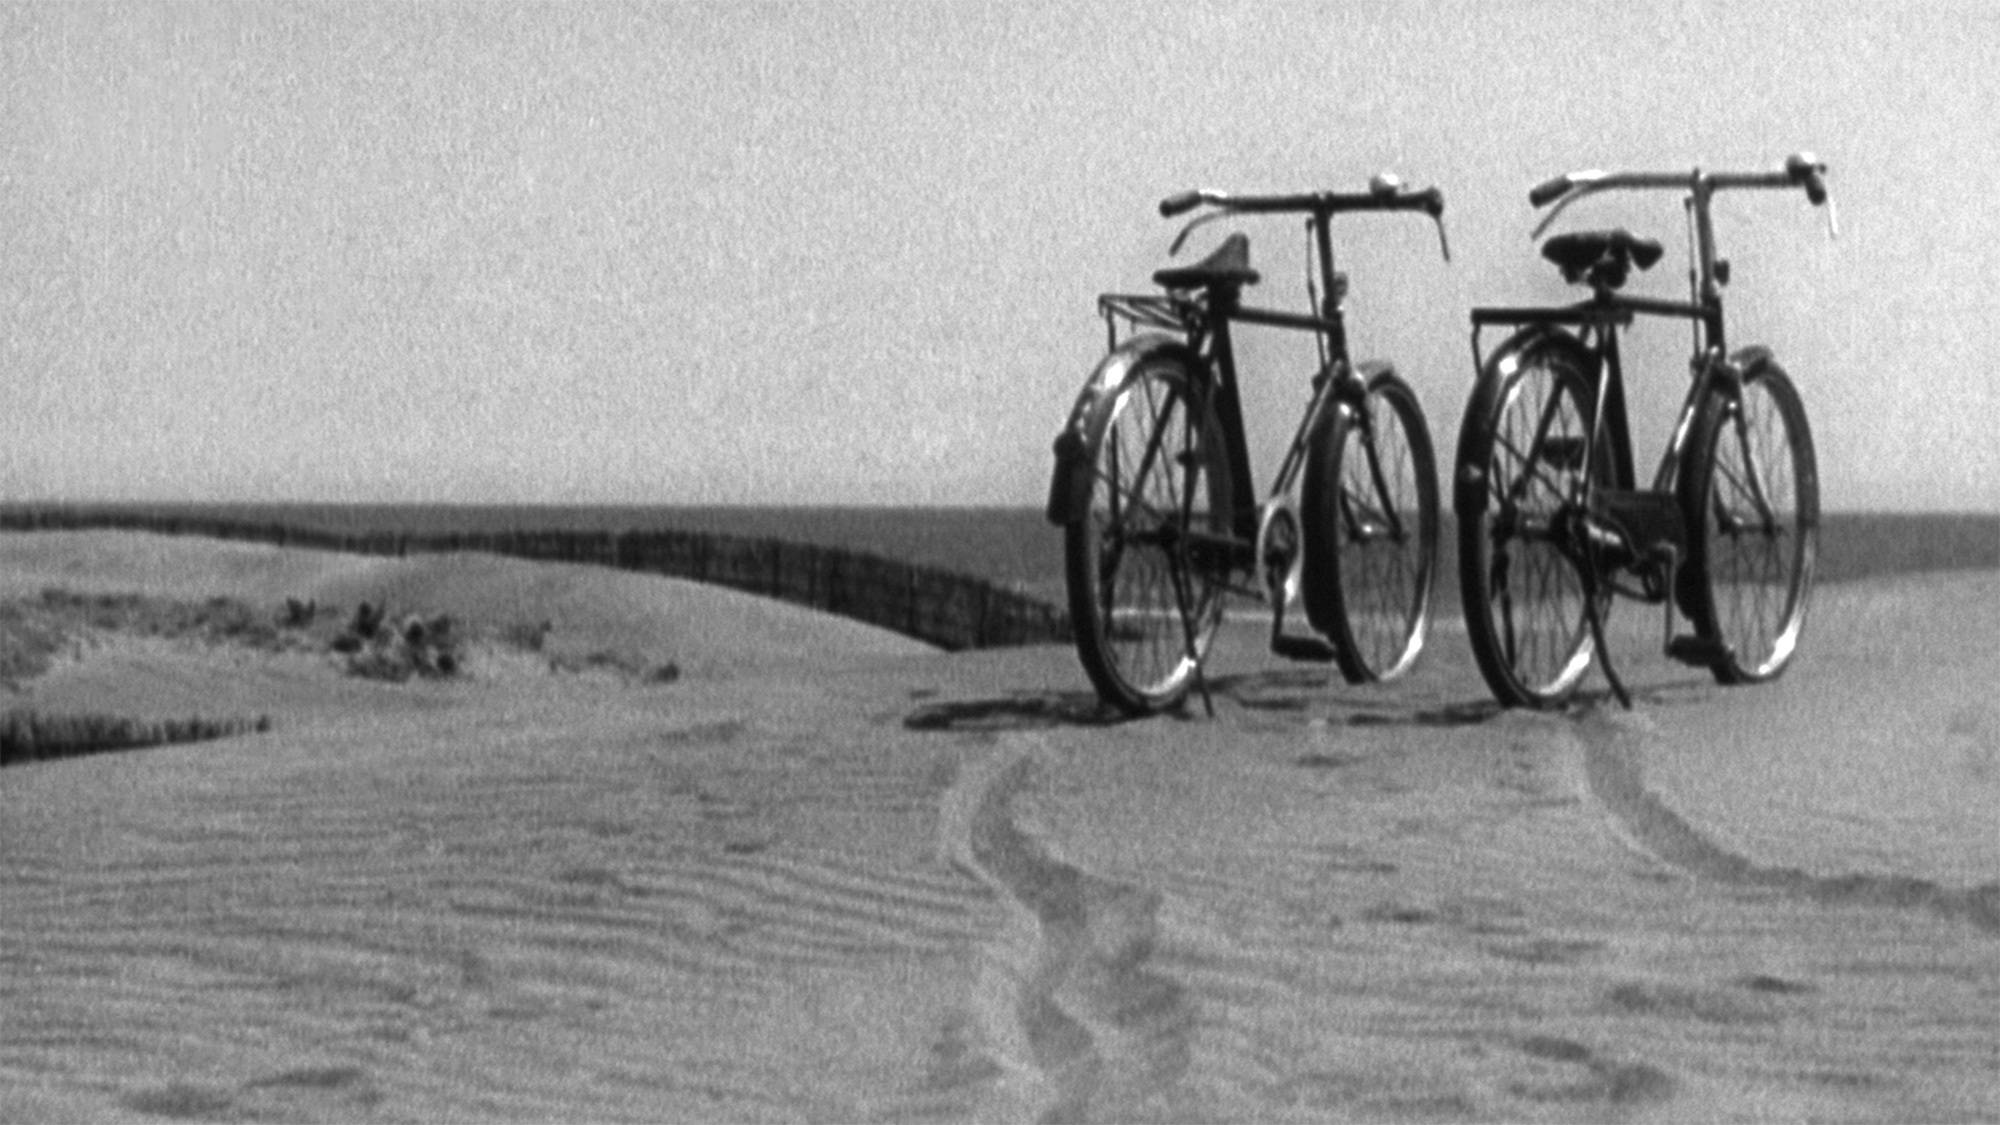 two bicycles parked on a sand dune next to the ocean